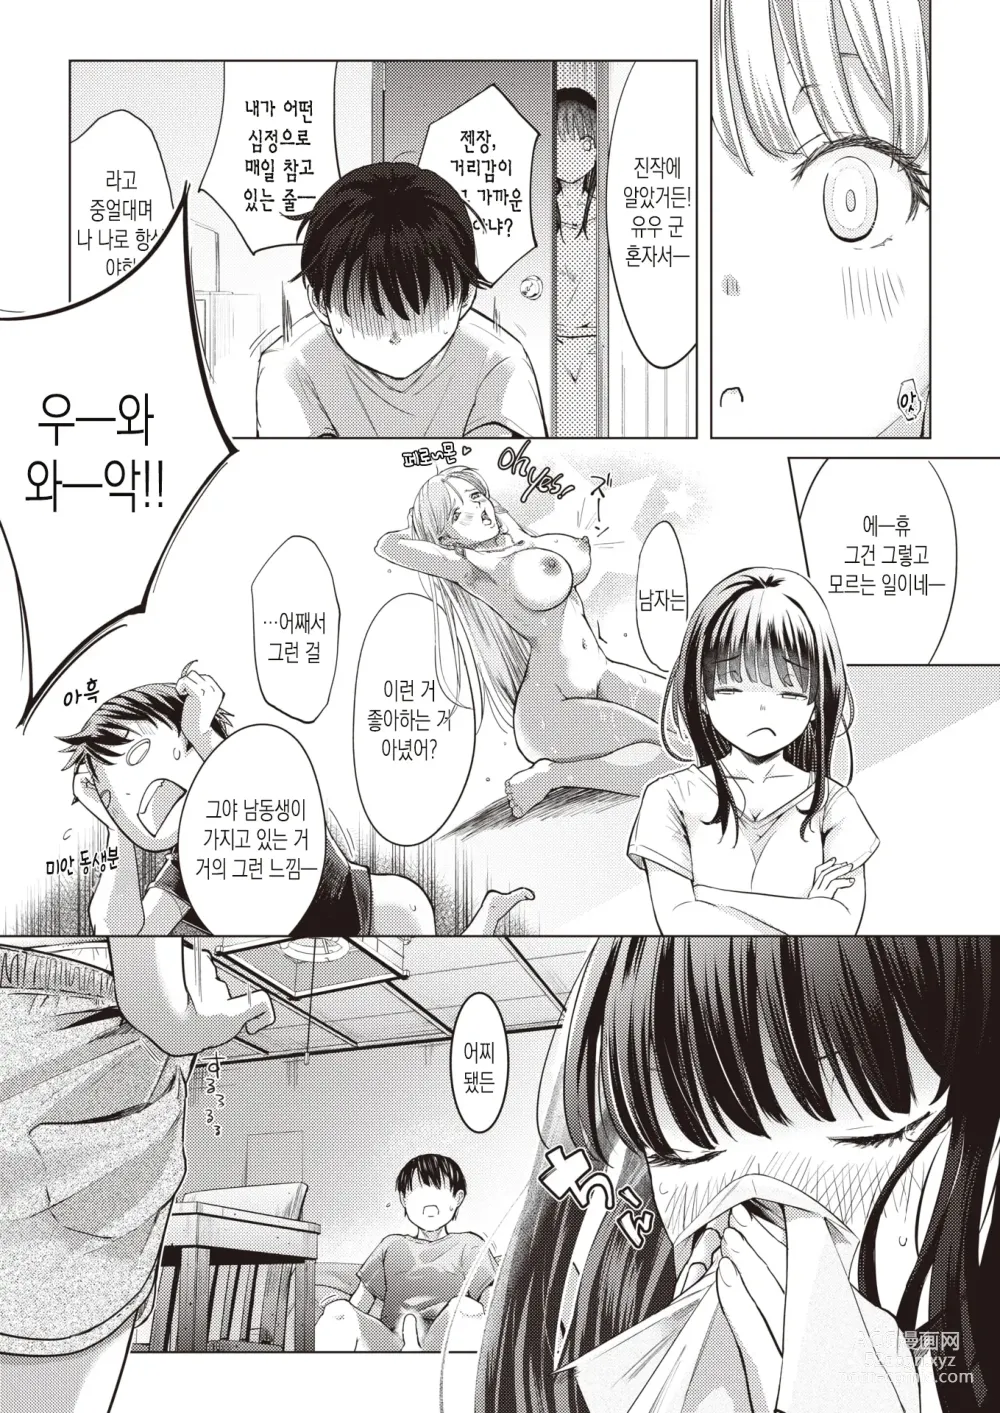 Page 9 of manga 착각누님Connect